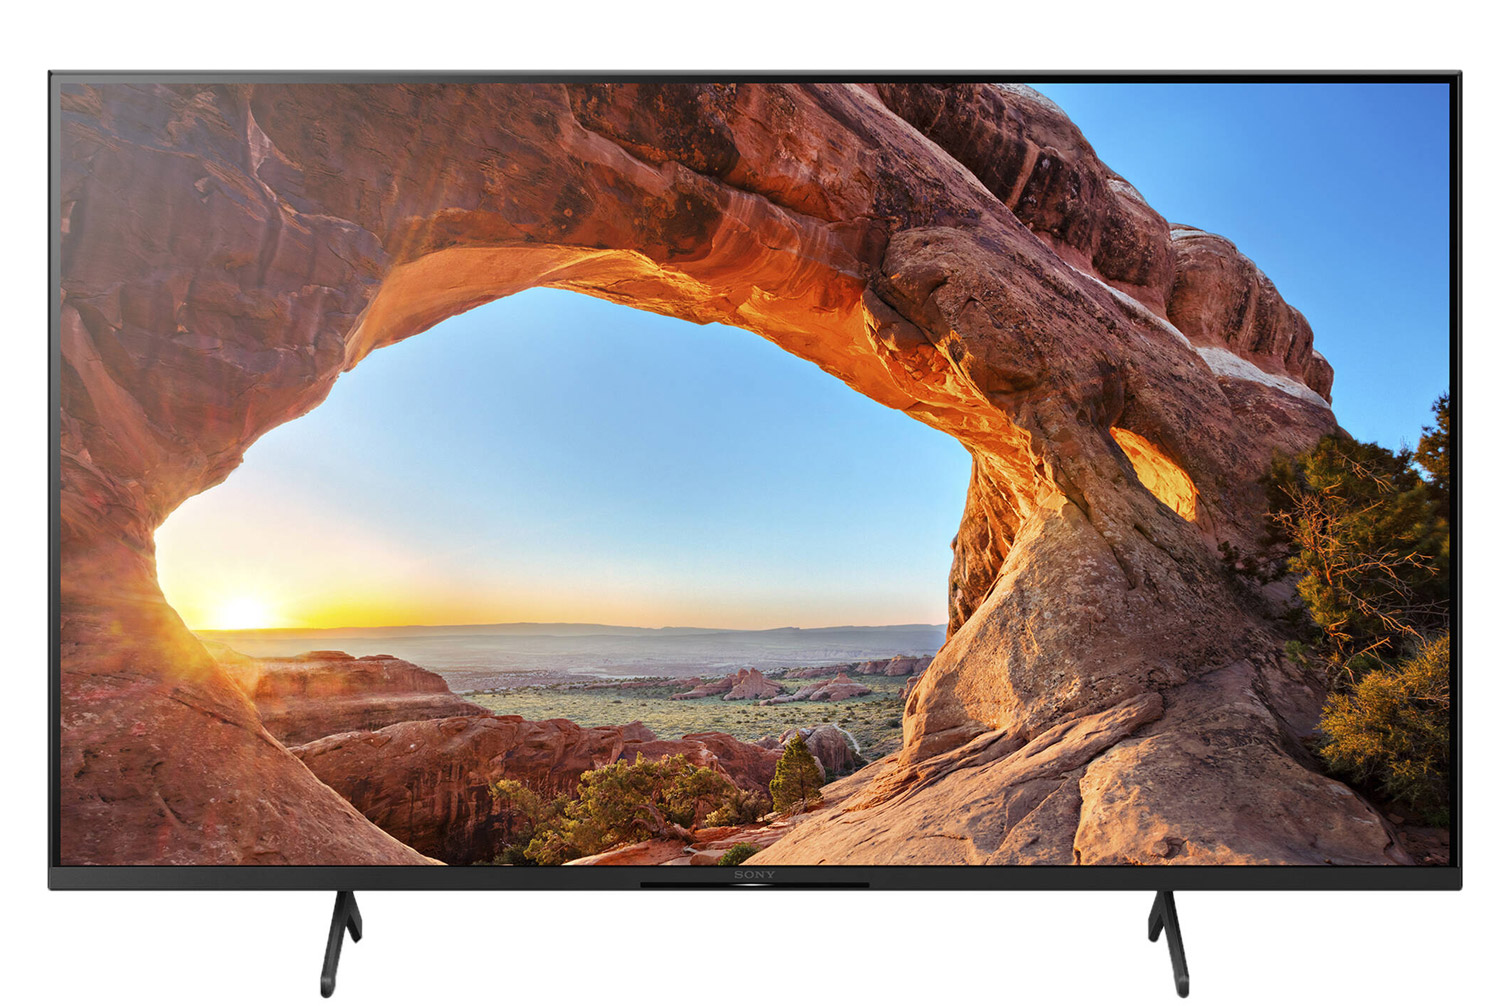  Smart Tivi 4K Sony Smart Tivi 4K Sony KD-55X86J 55 inch Android TV 55 inch Android TV